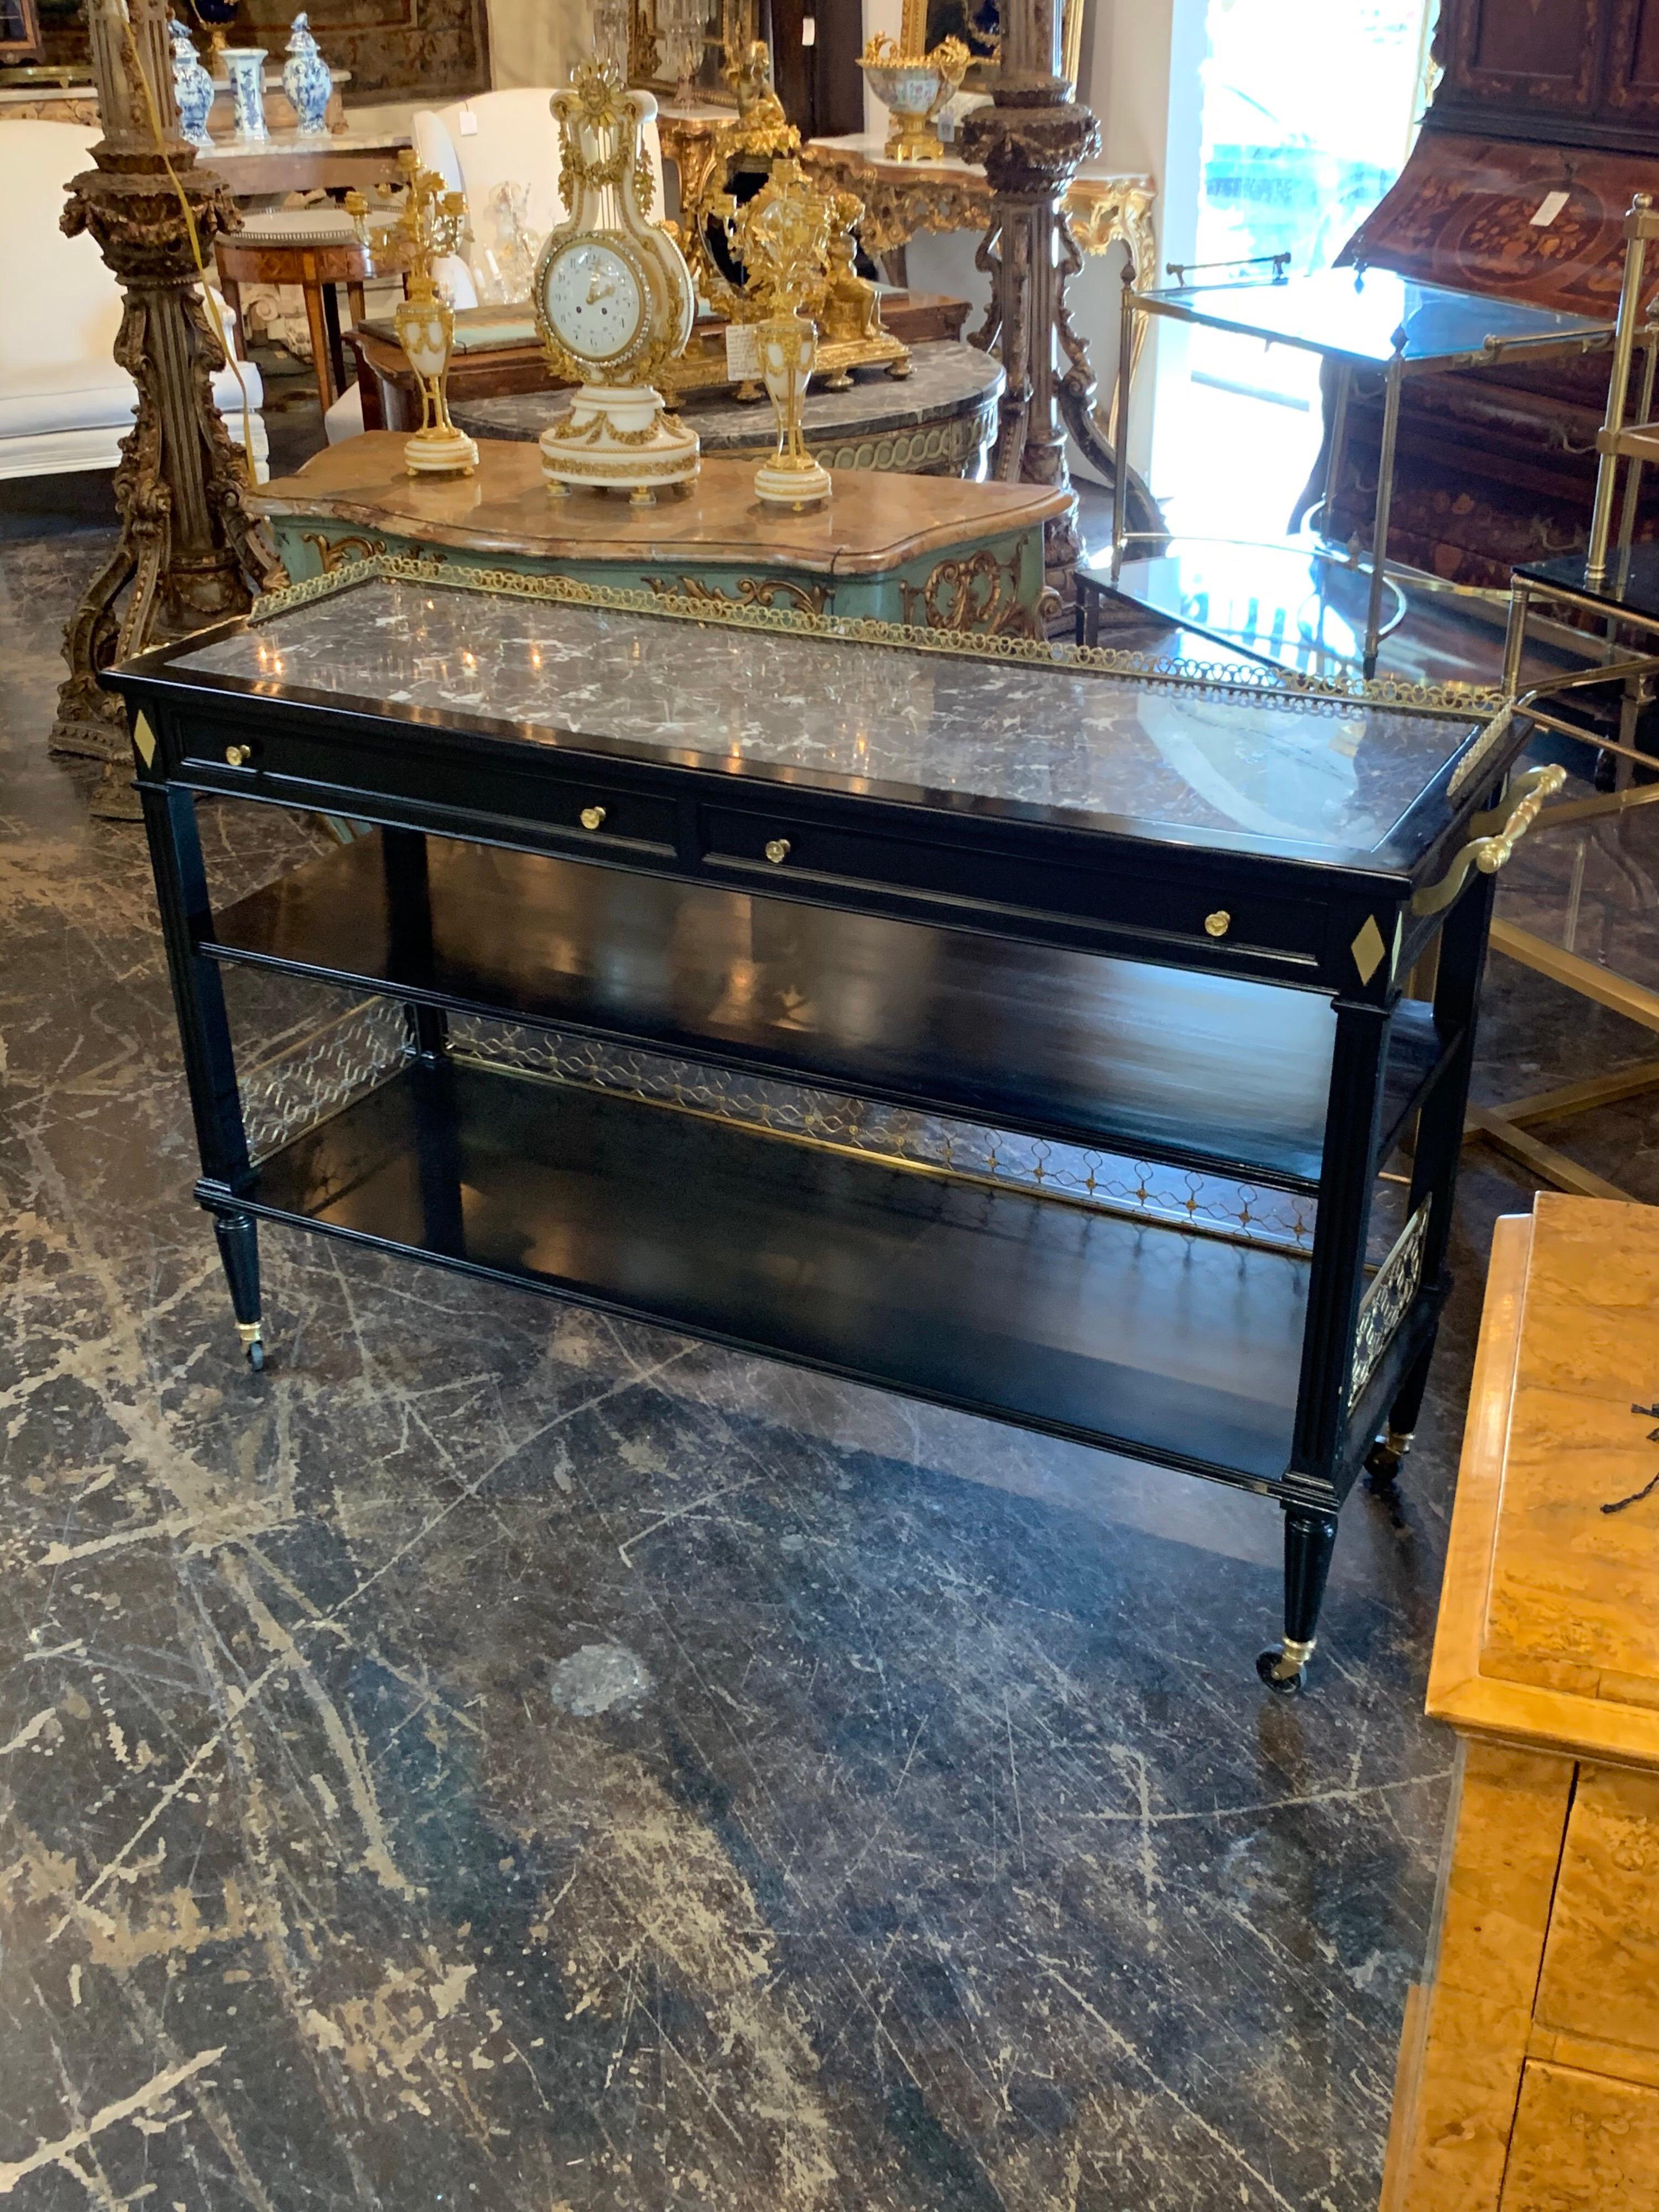 Very elegant French midcentury black lacquered server with gorgeous bronze details. It has a beautiful inset grey and white marble top. There is nice sectioned storage in the drawers. A truly stunning piece!